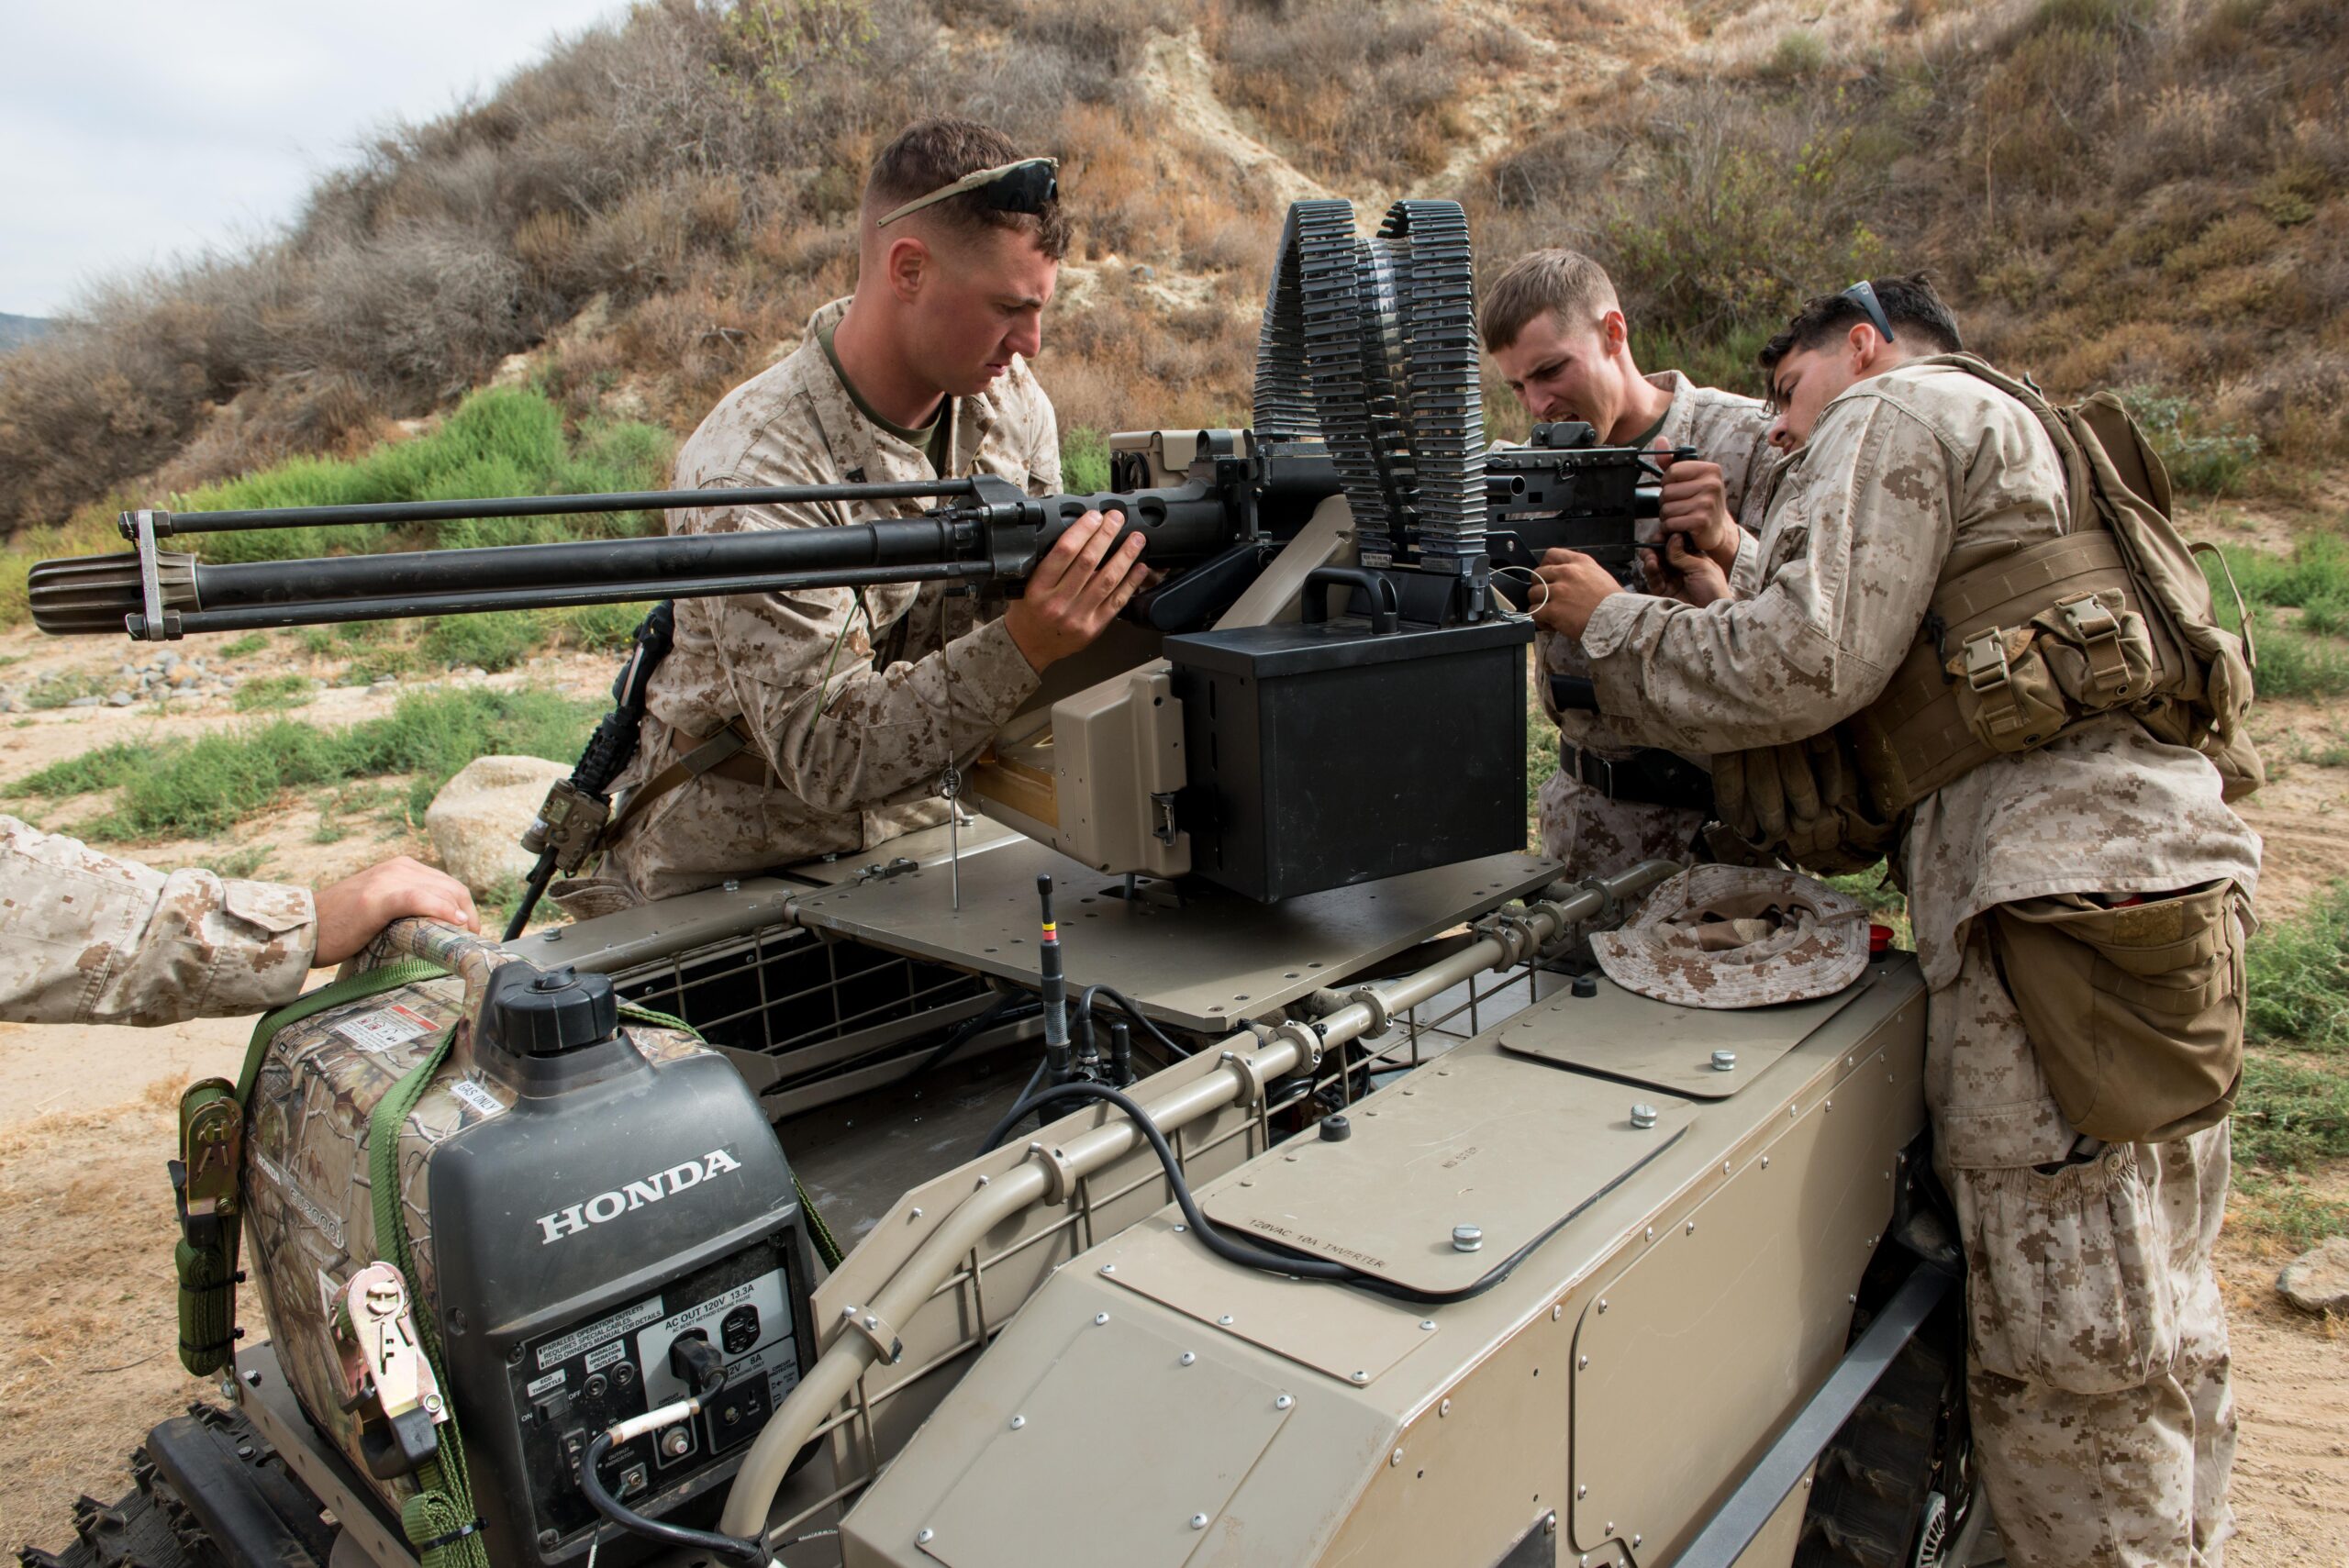 Marines Seek To Outnumber Enemies With Robots